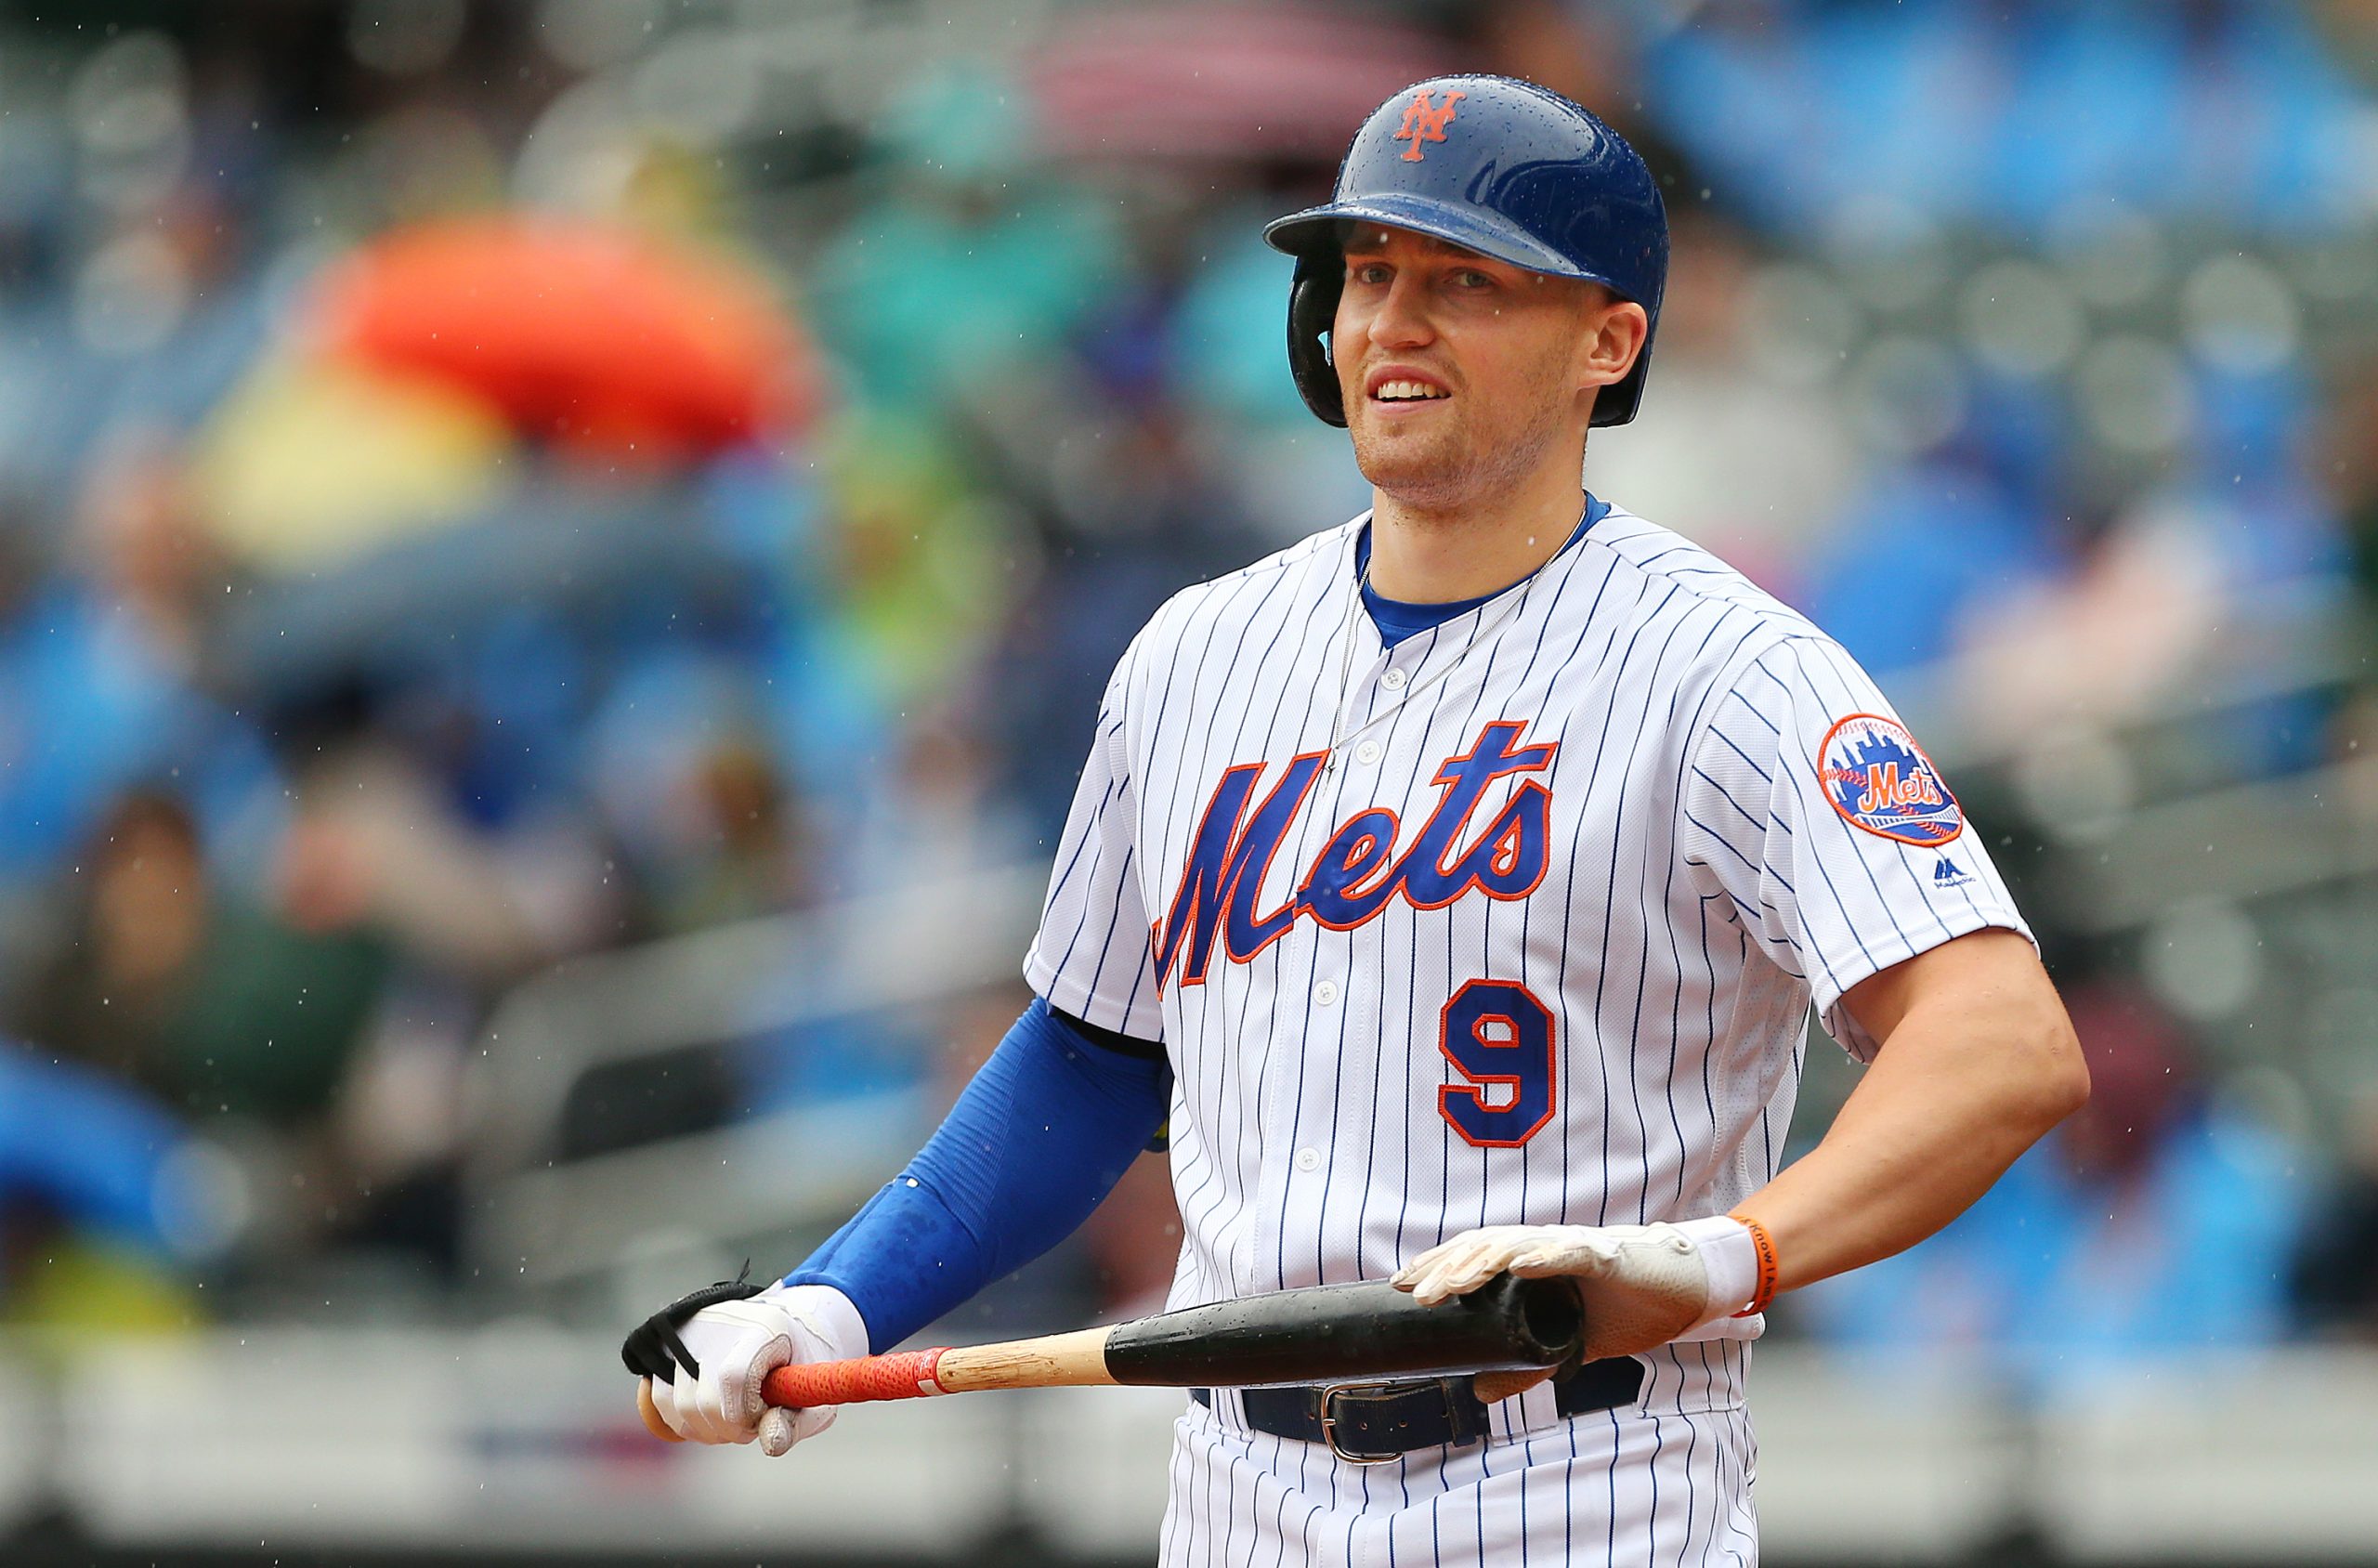 Mets star Brandon Nimmo: New York was 'sensory overload' at first